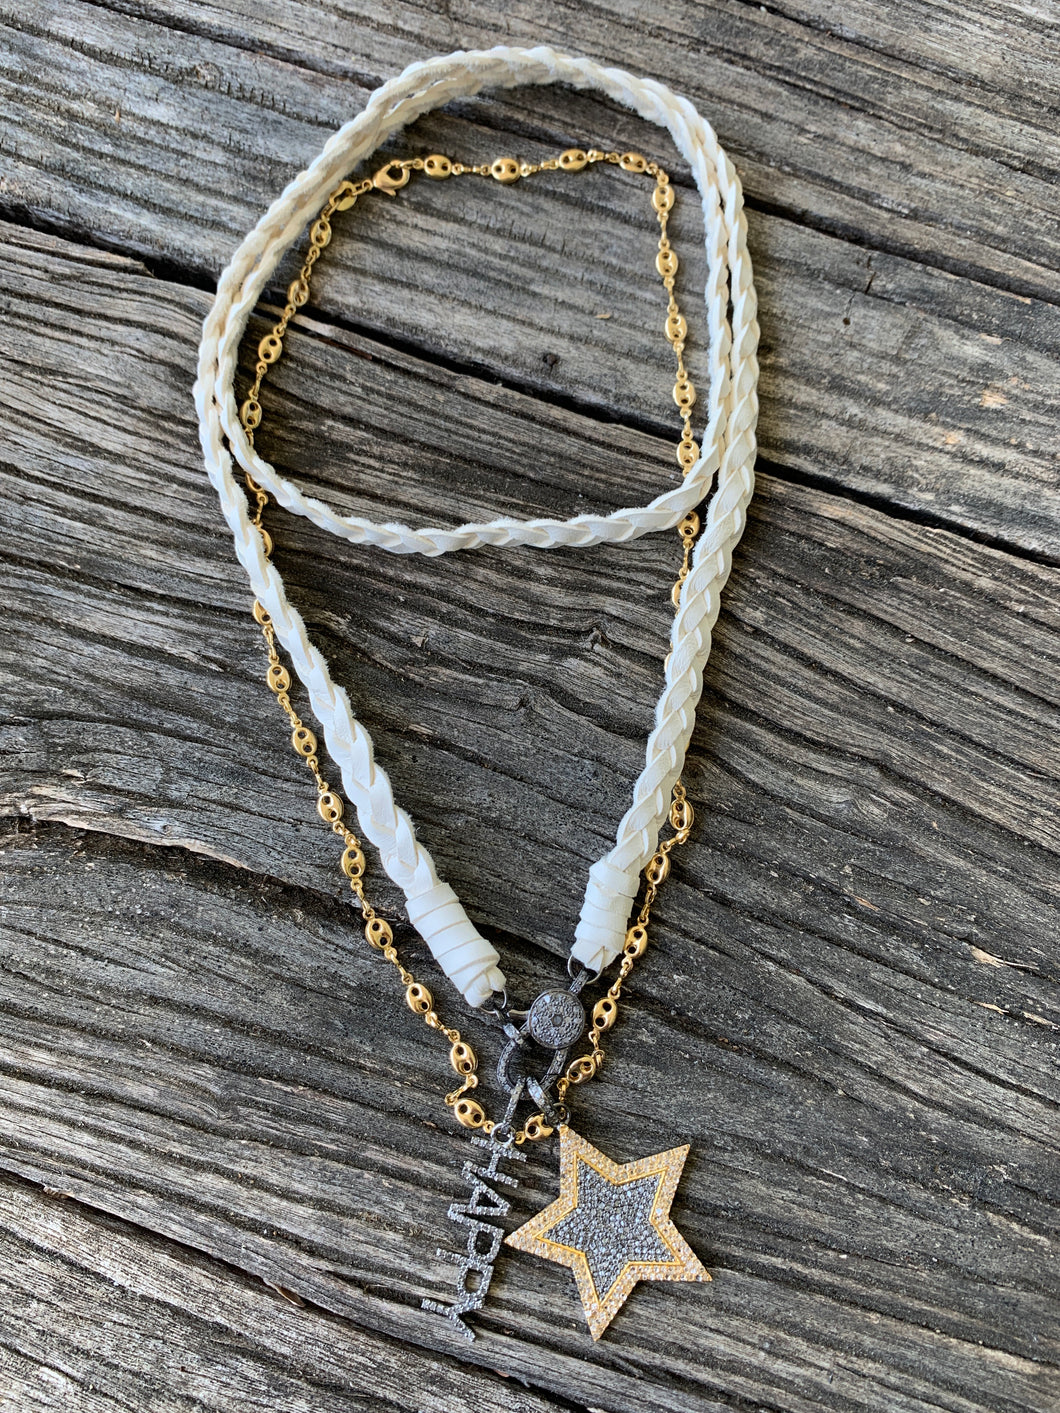 Braided Leather Wrap Necklace with Pave Diamond Clasp.  Pave Diamond Two Tone Star and Happy Pendants